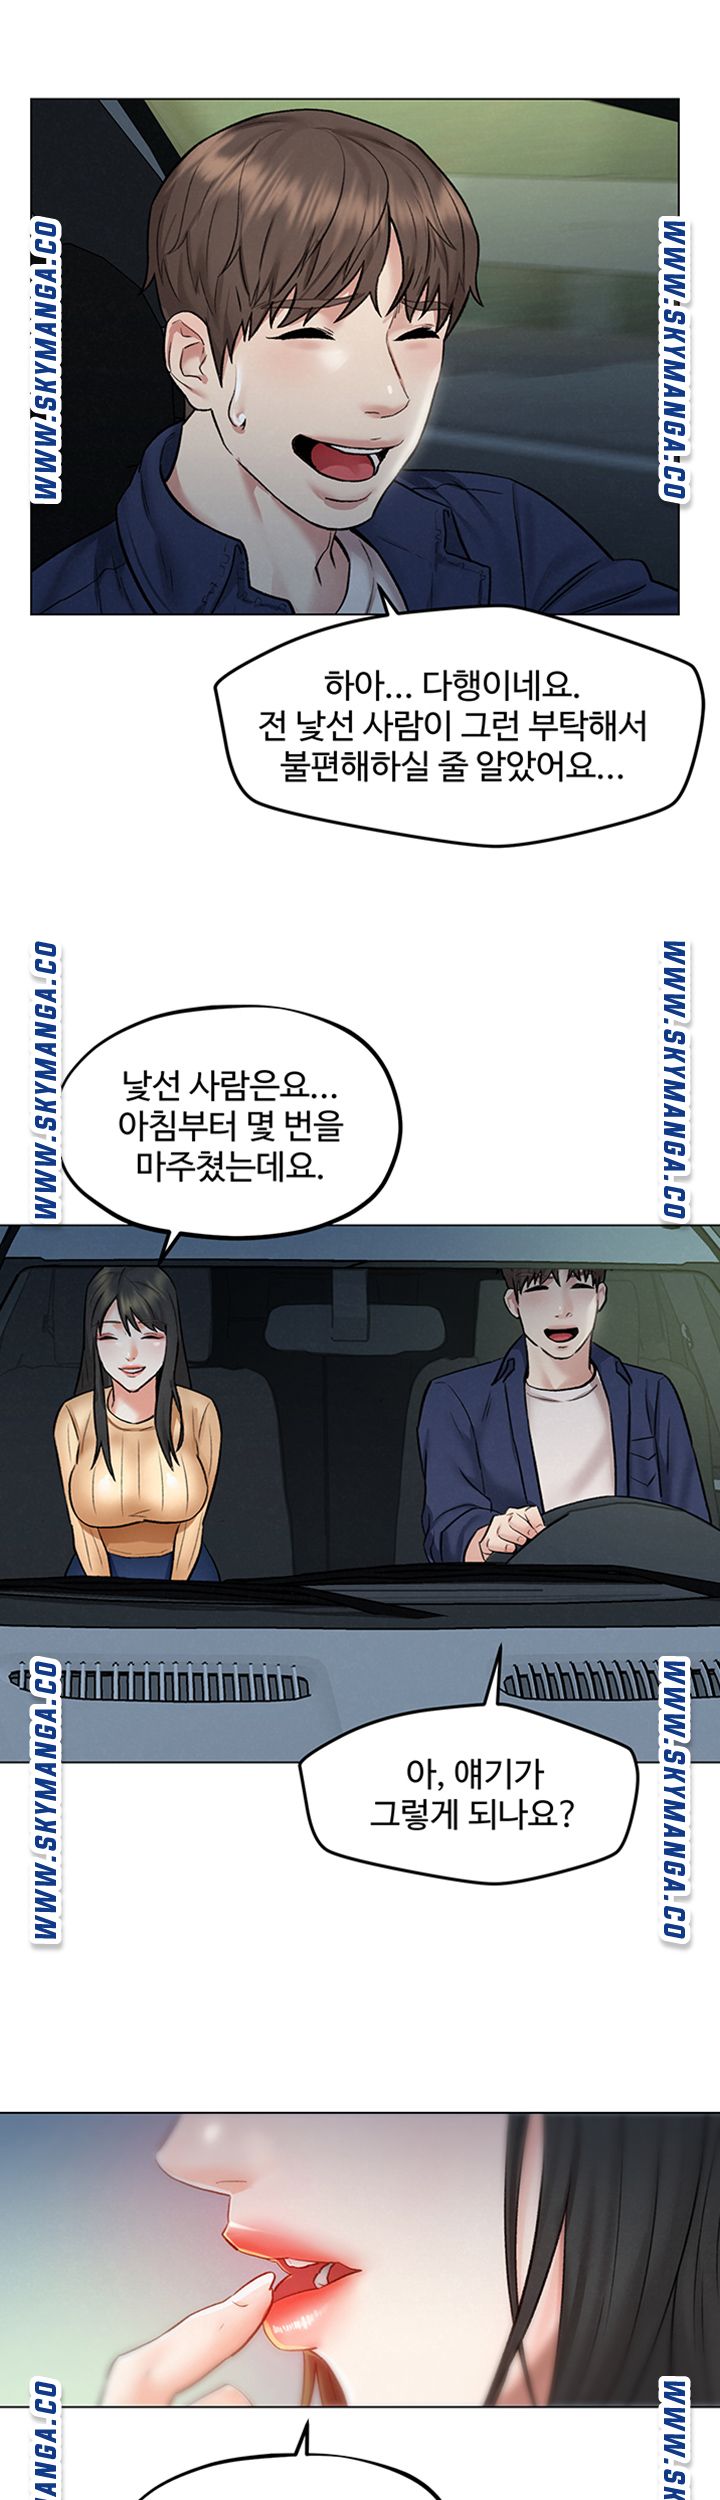 Affair Travel Raw - Chapter 8 Page 2